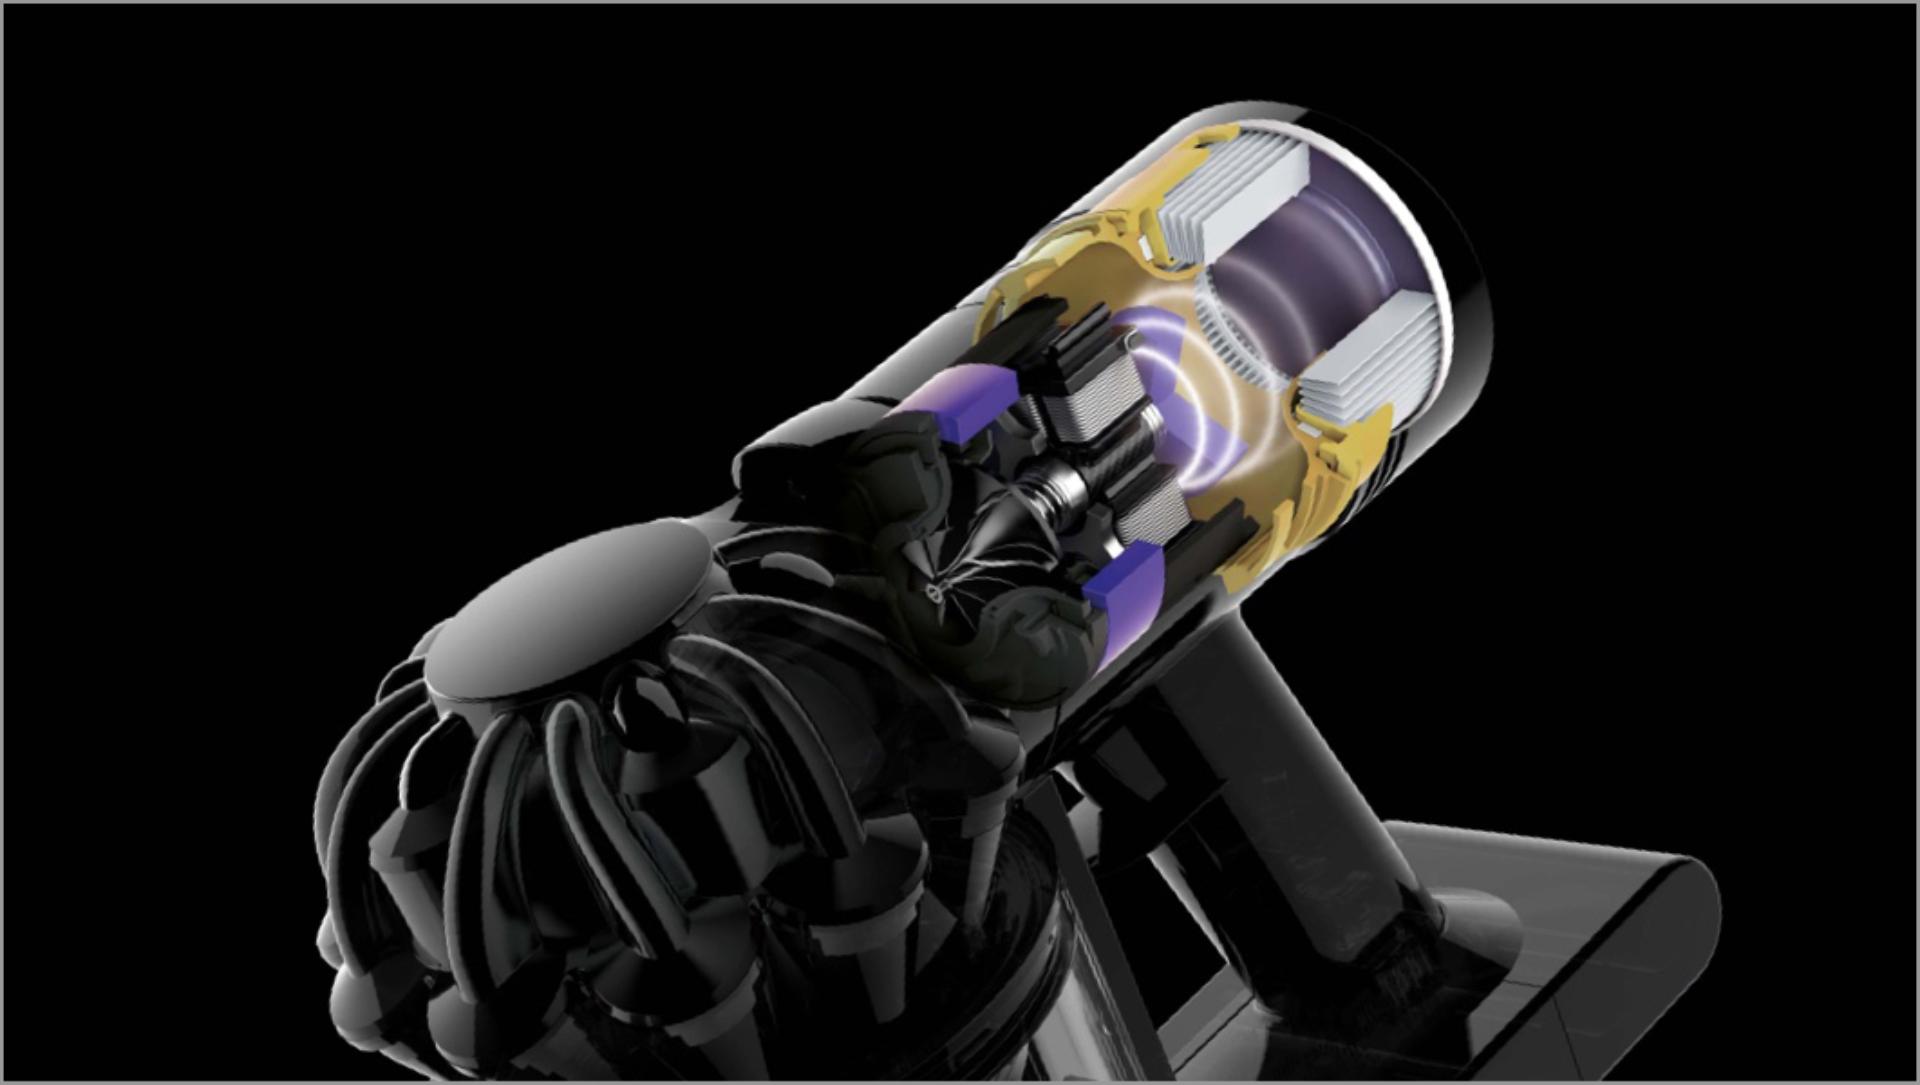 Cutaway of the of the Dyson V8 vacuum cleaner